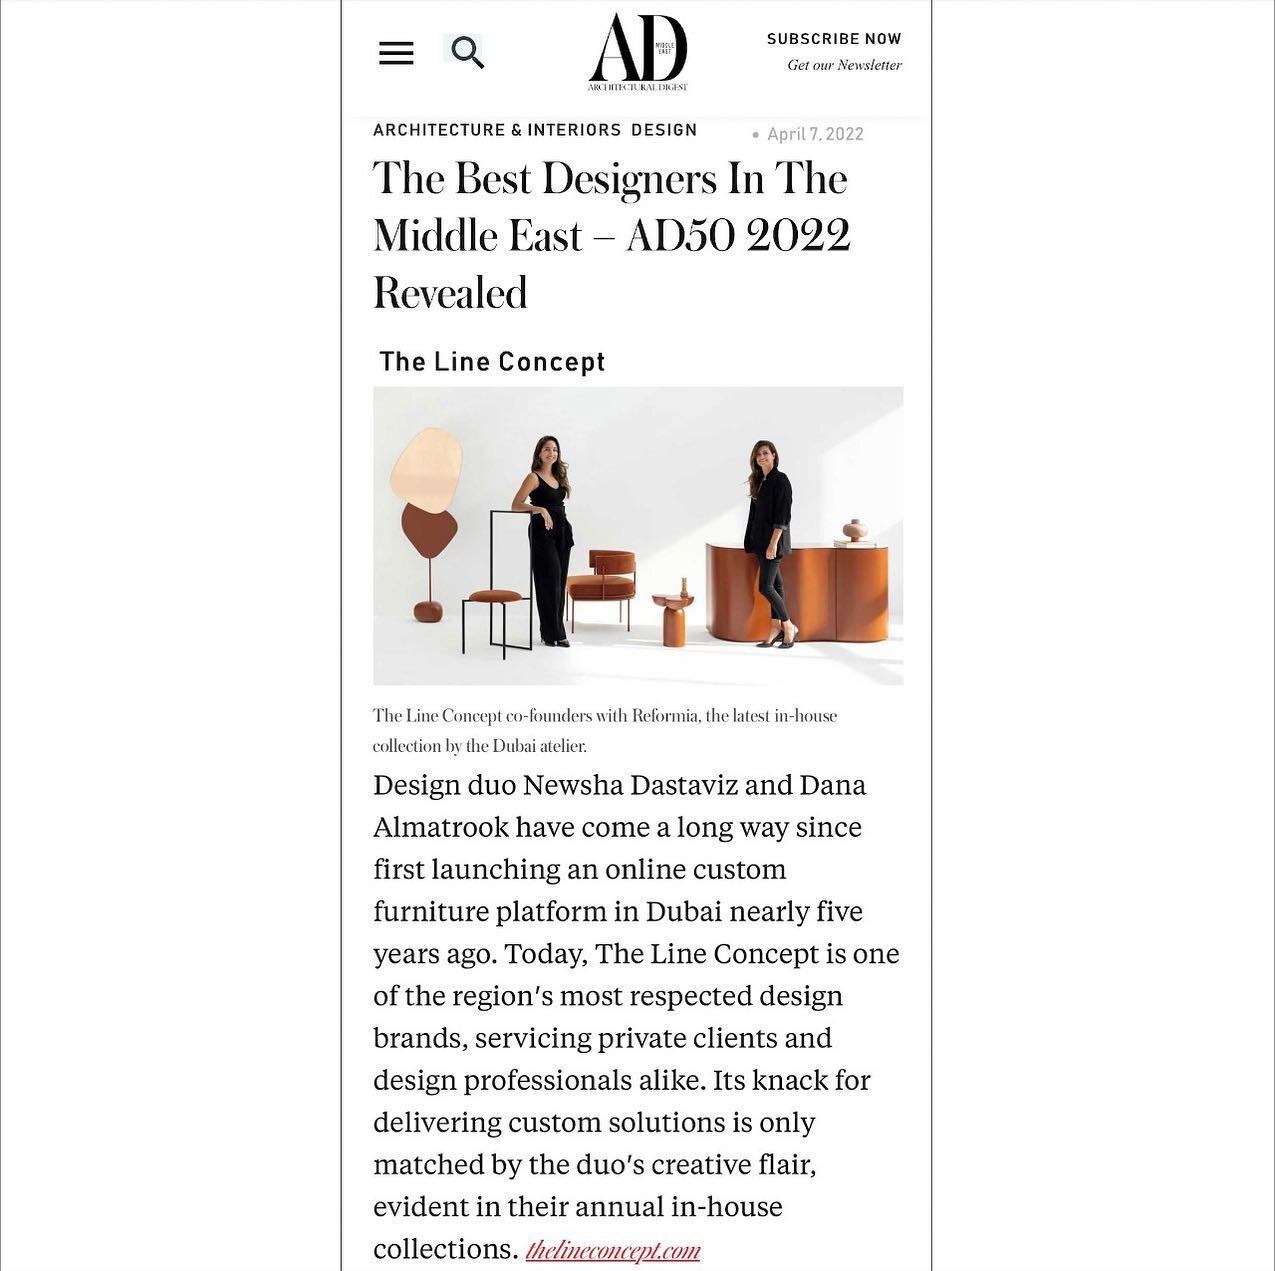 We are thrilled and honored to be included in @admiddleeast AD&rsquo;s Top 50 best designers in Middle East 2022.